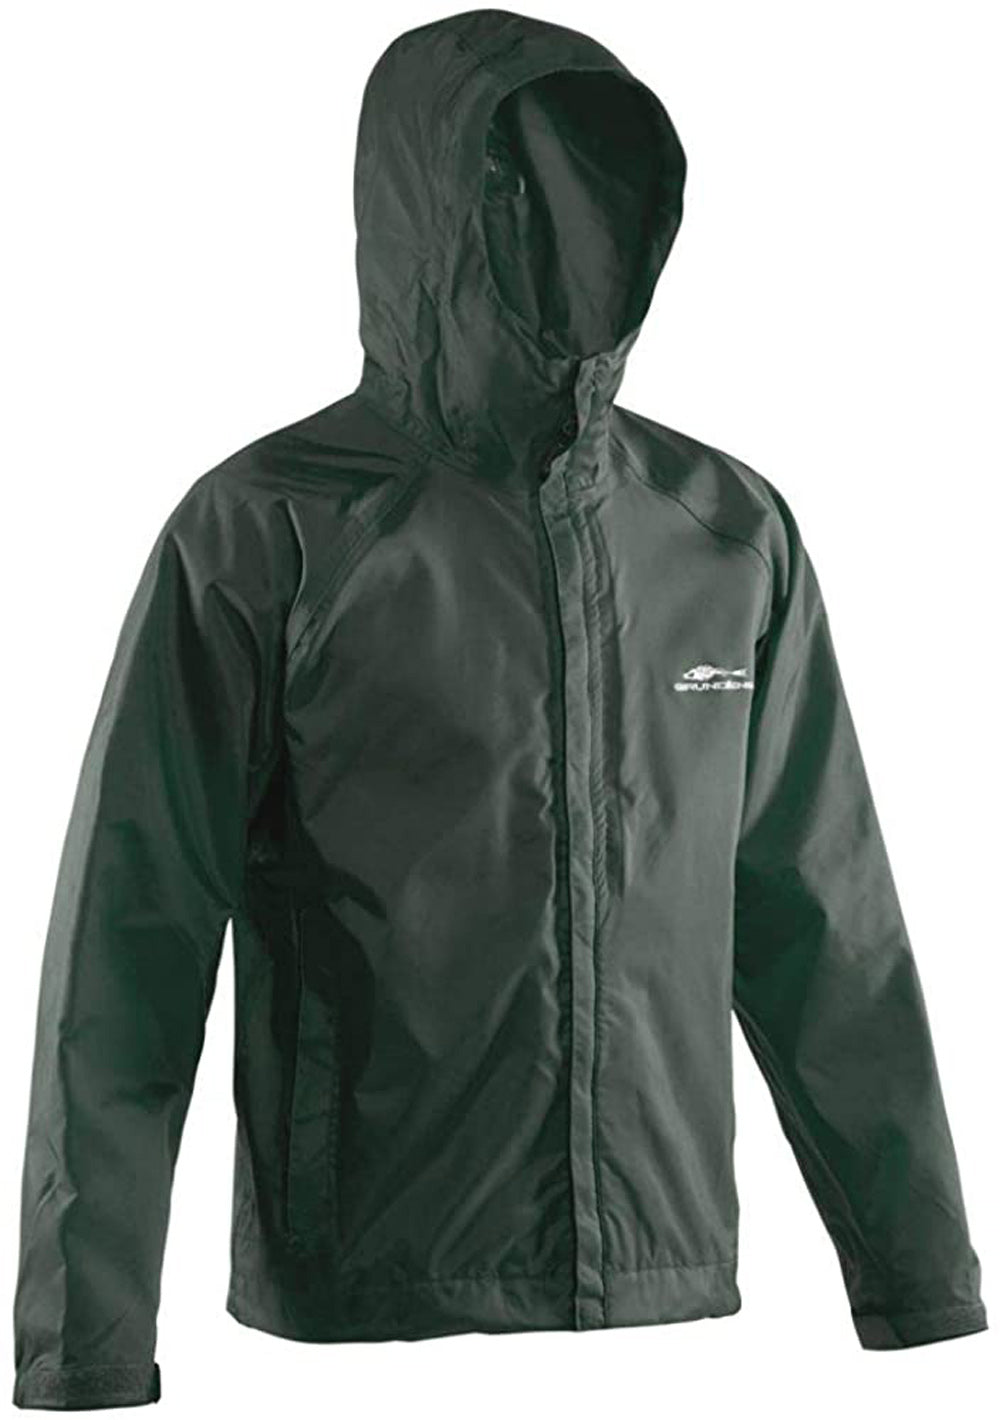 Weather Watch Jacket in Green color from the front view